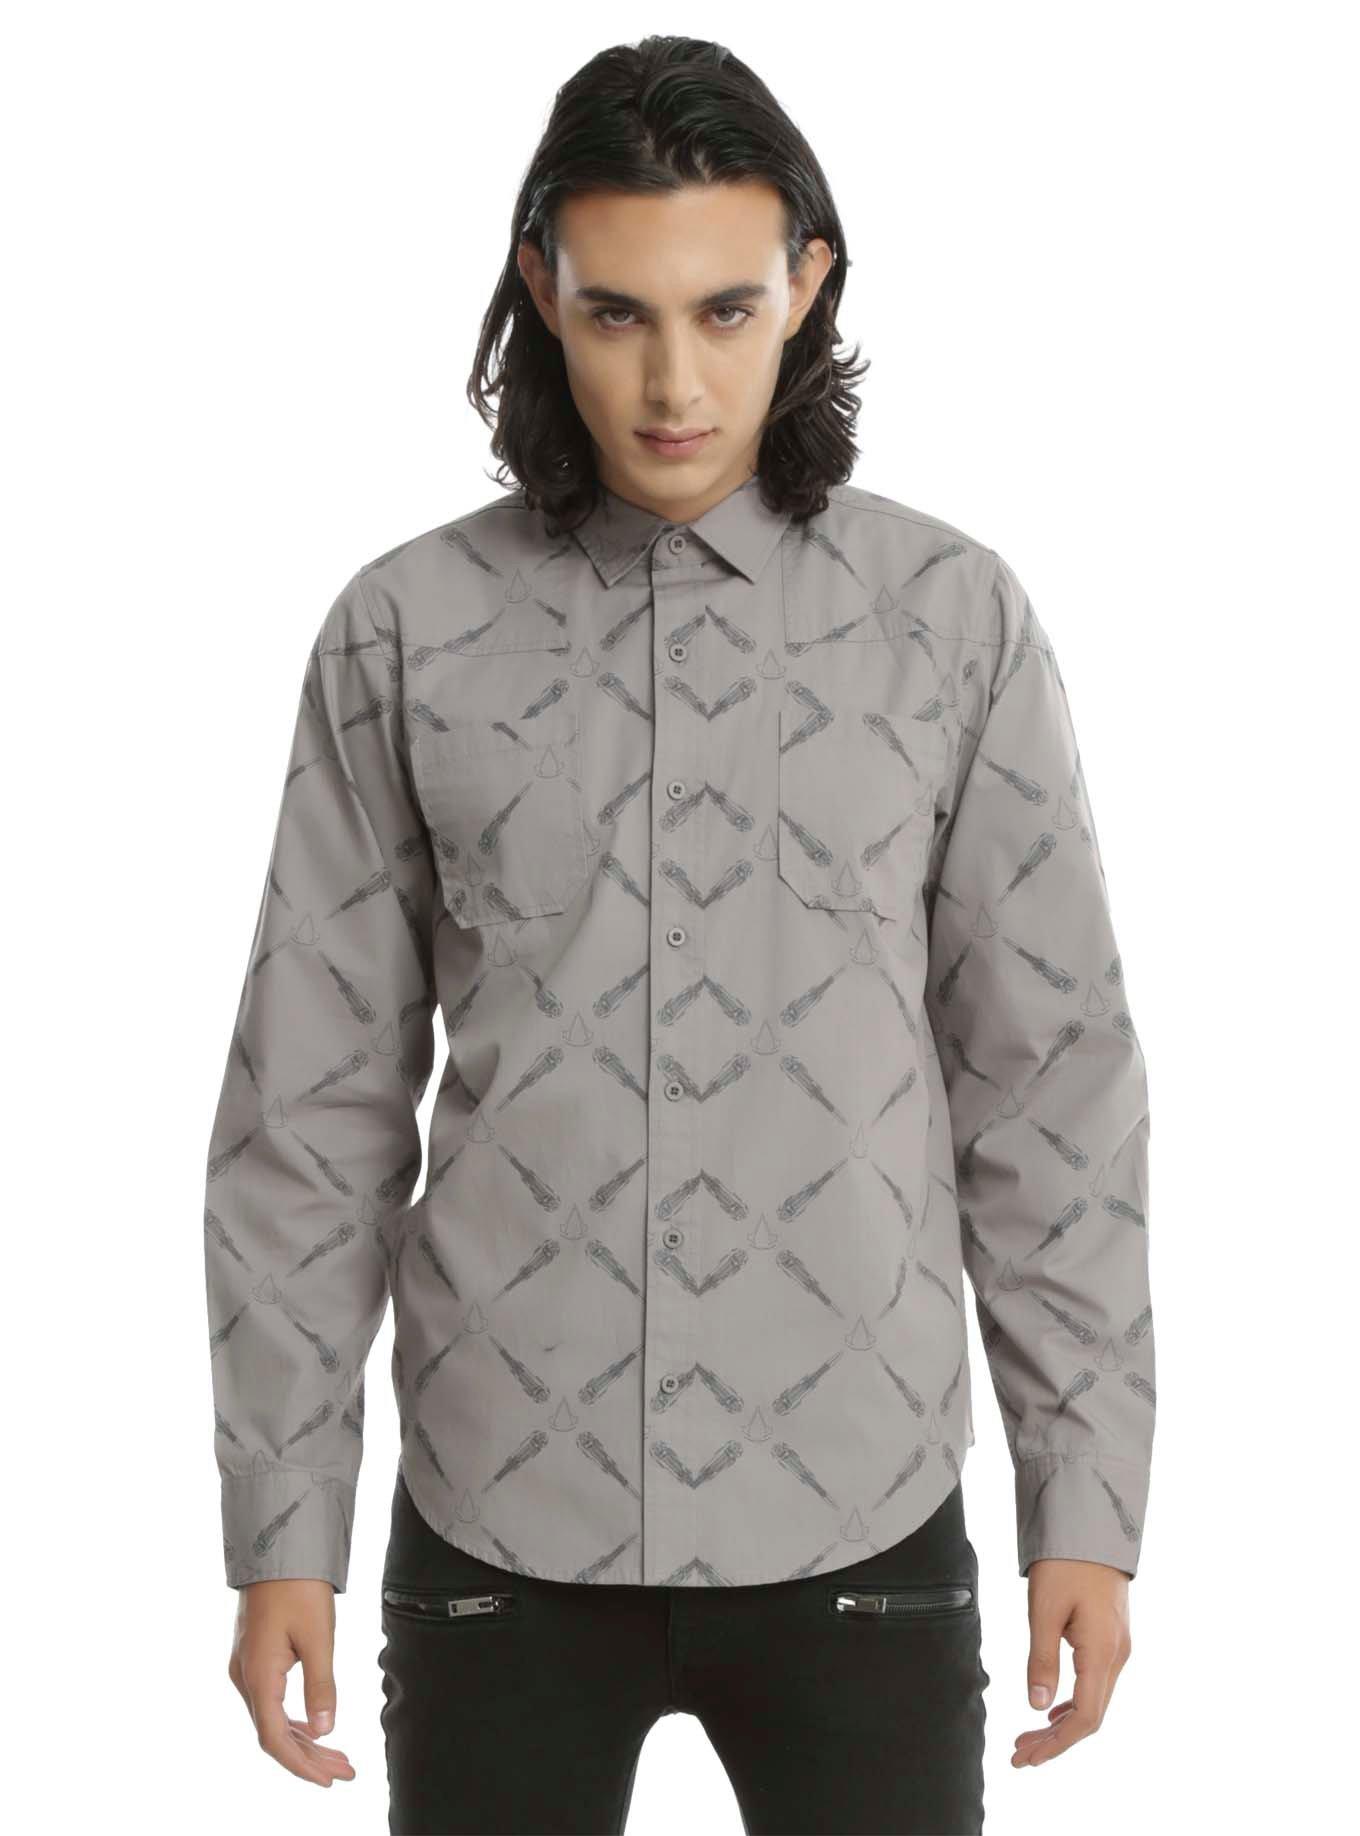 Assassin's Creed Blade Print Long-Sleeve Woven Button-Up, GREY, hi-res